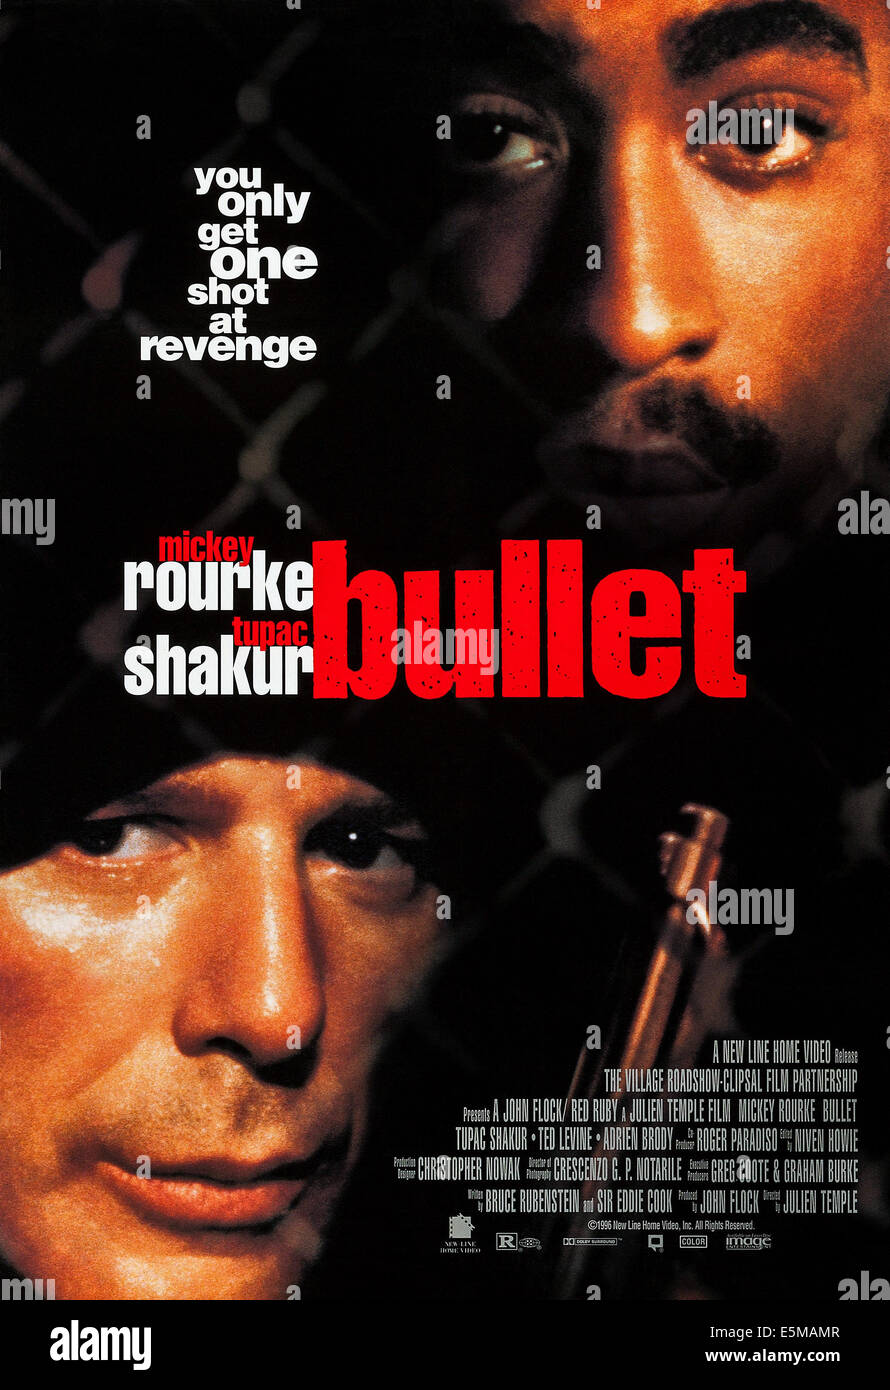 Low-Res abspeichern - bullet-us-poster-tupac-shakur-top-mickey-rourke-1996-new-linecourtesy-E5MAMR